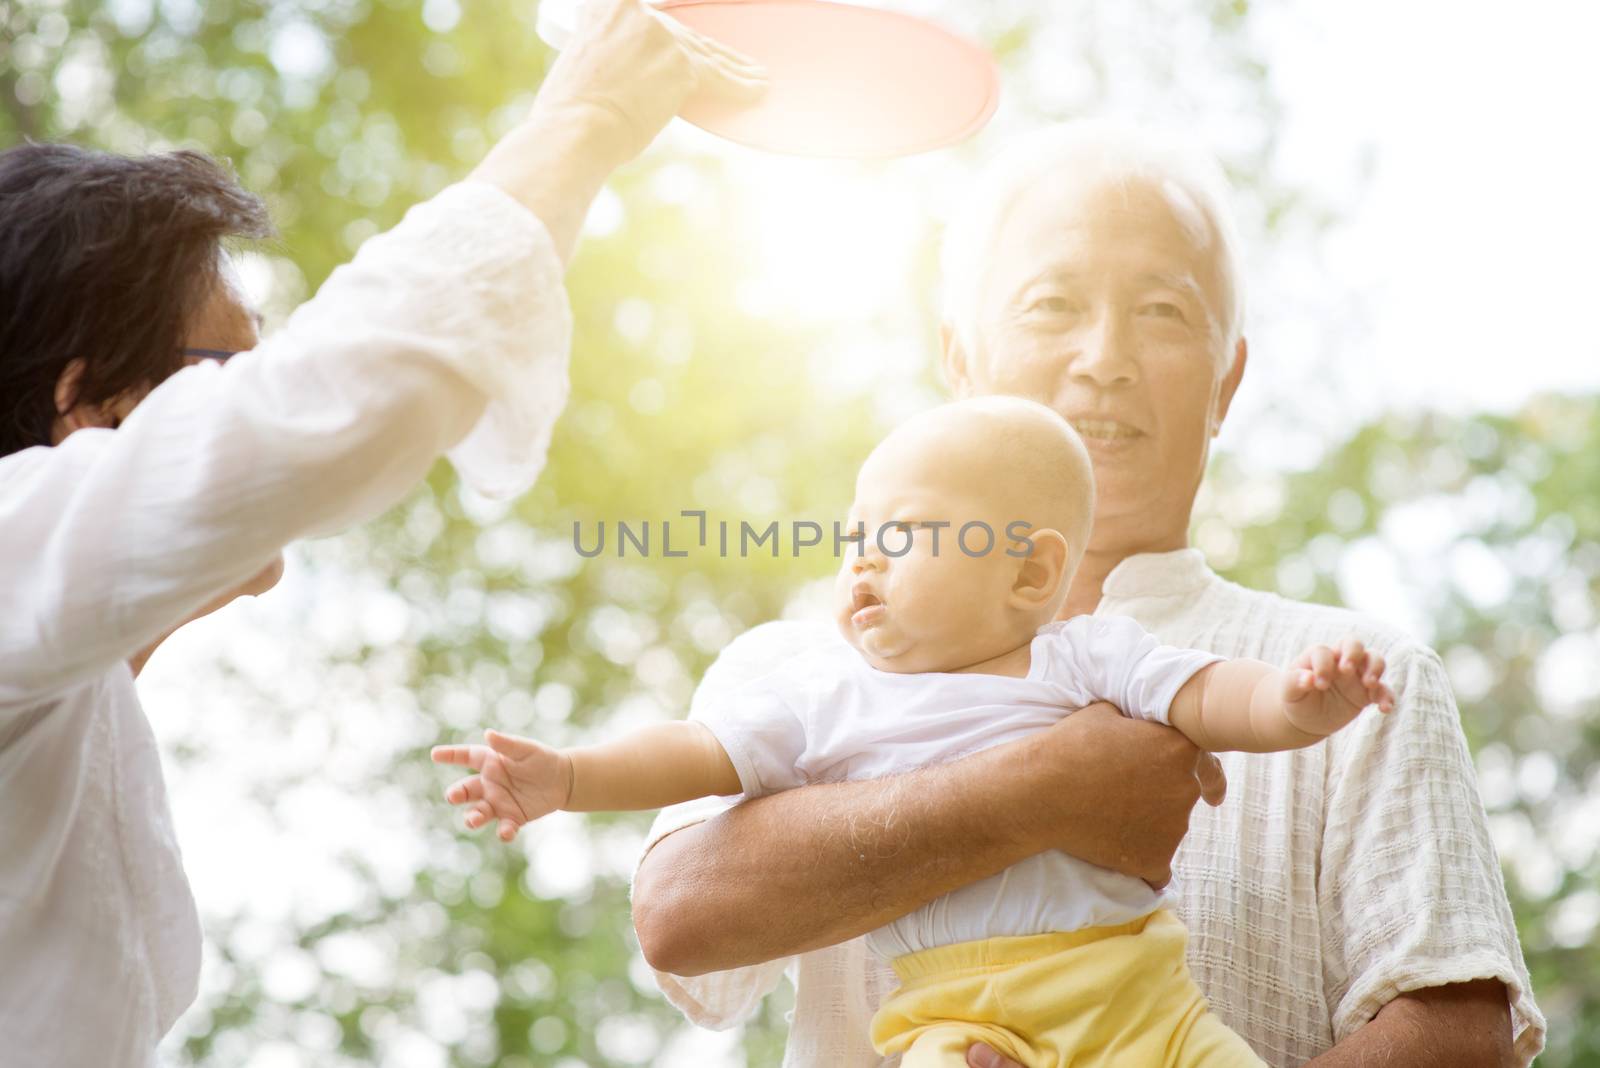 Grandparents taking care of baby grandchild in outdoor park. Asian family, life insurance concept.